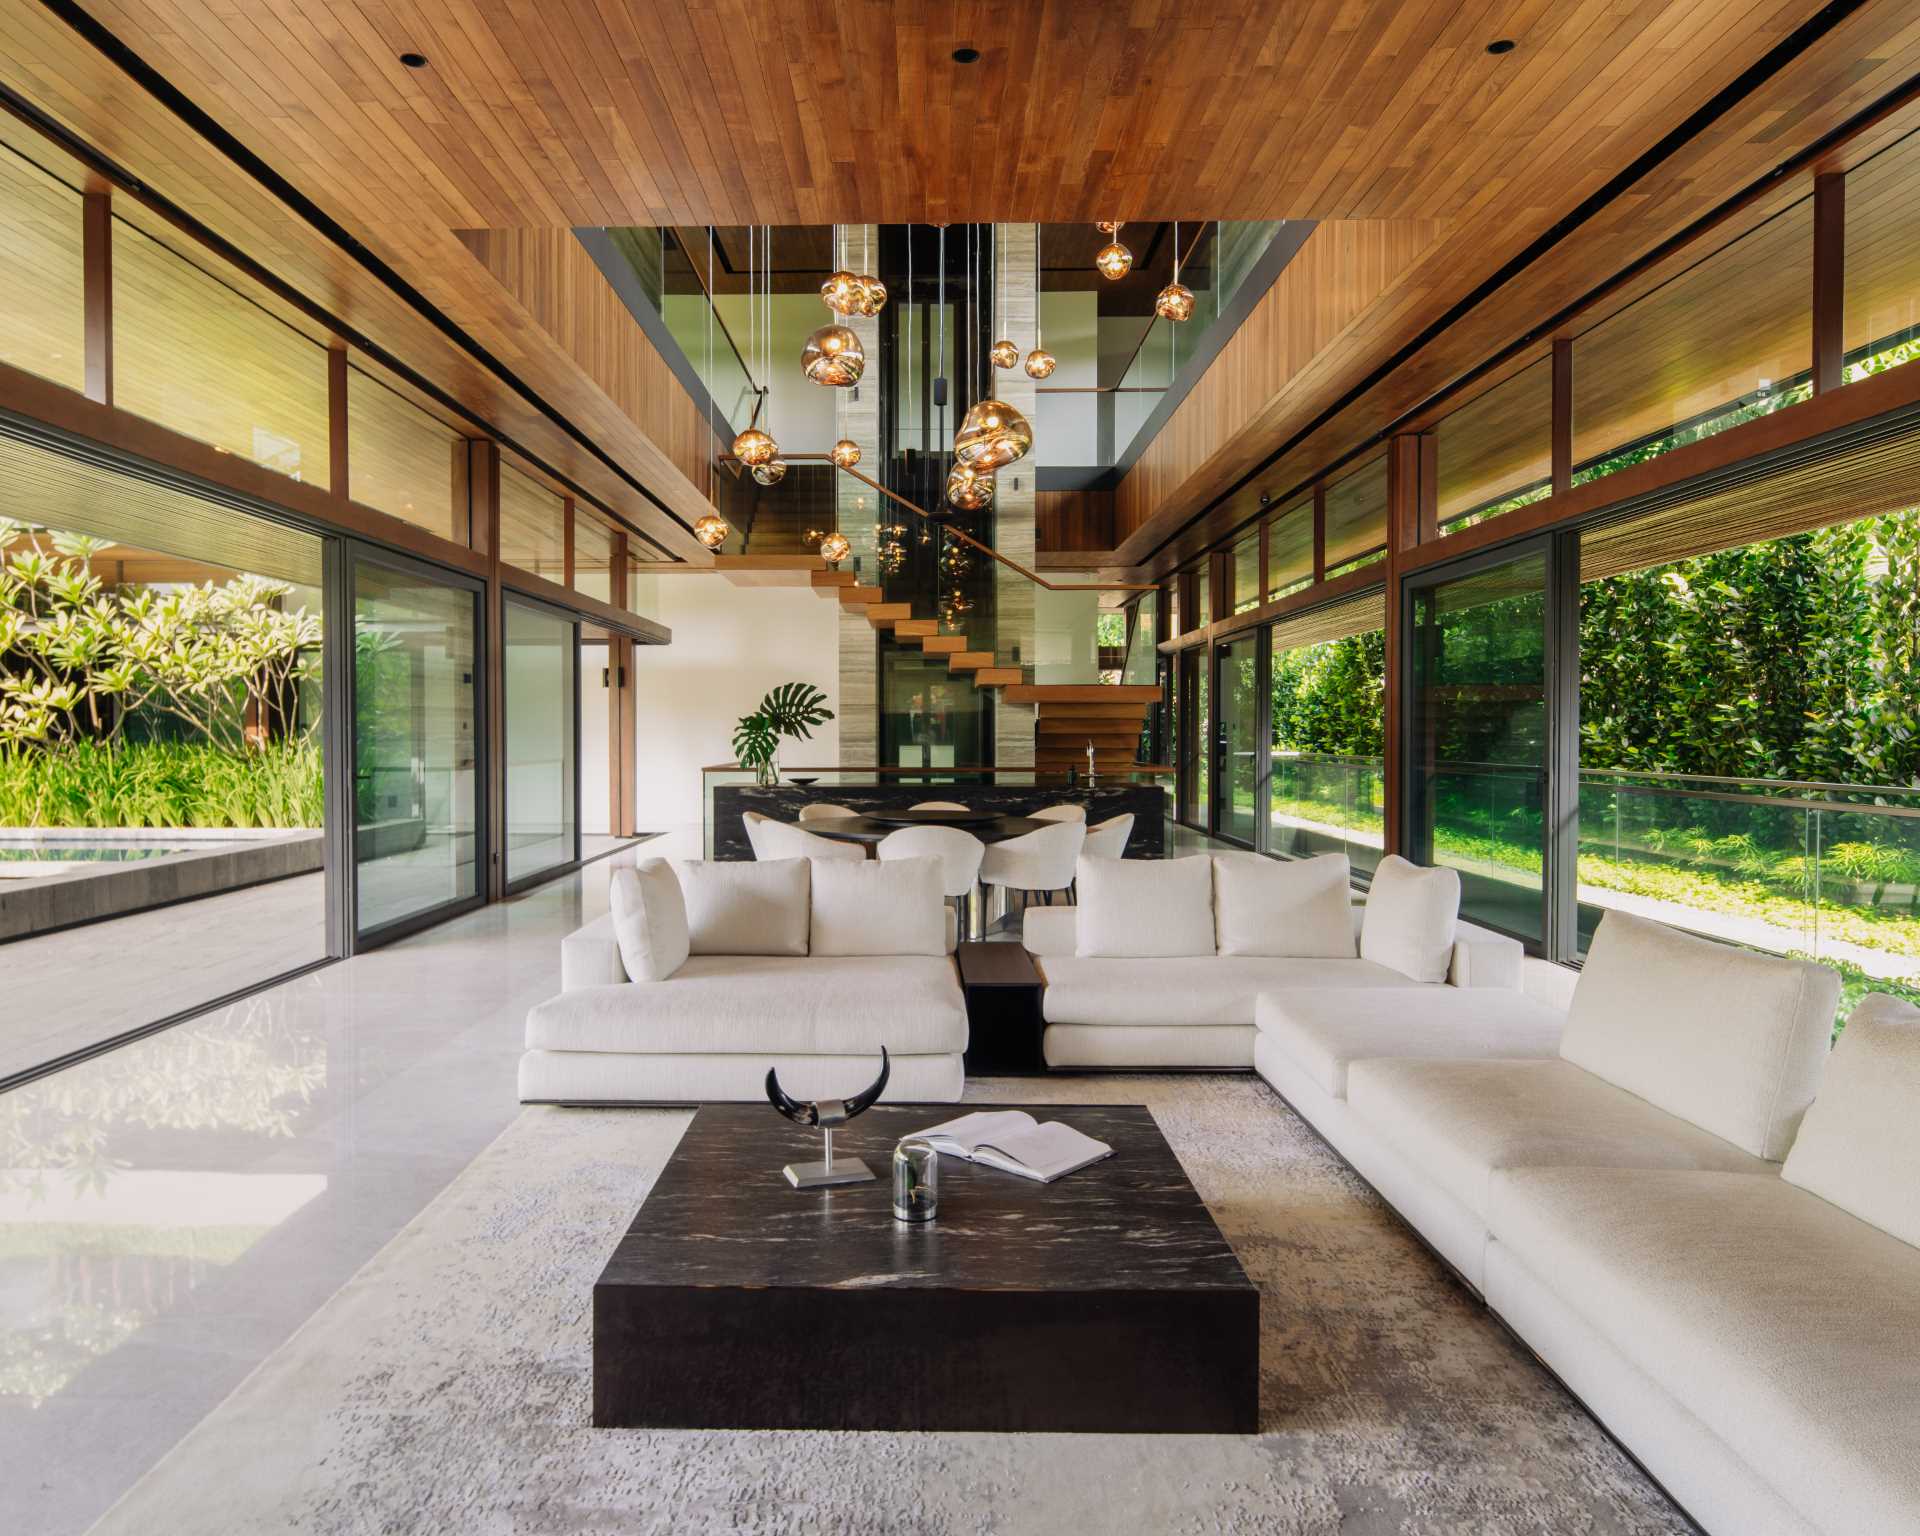 A modern open-plan living room and dining area with high wood ceilings and sliding glass doors that connect with the outdoor spaces.